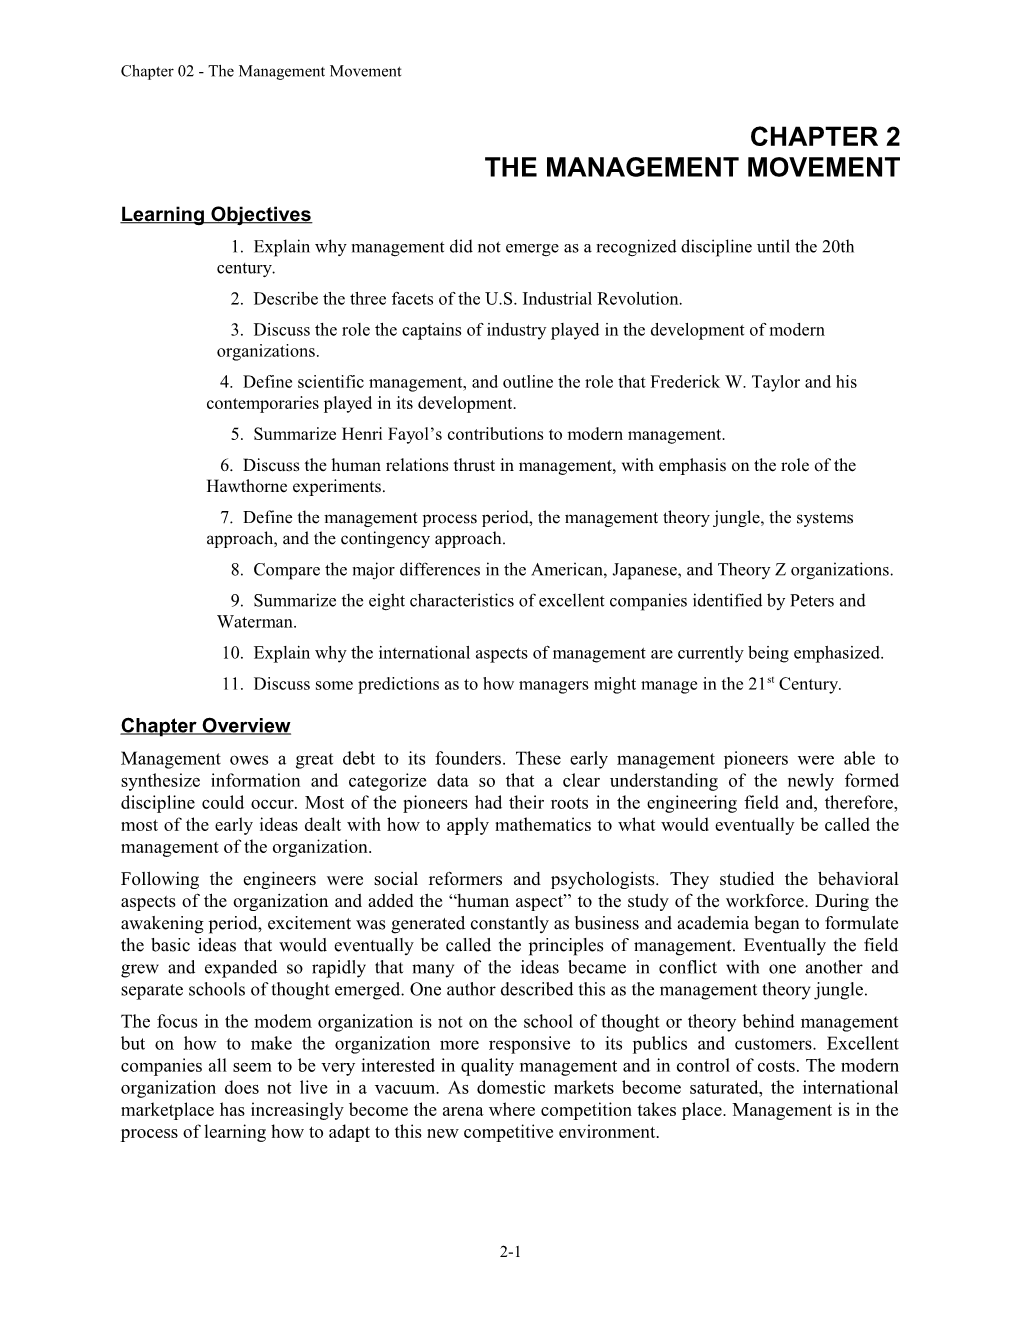 Chapter 02 - the Management Movement